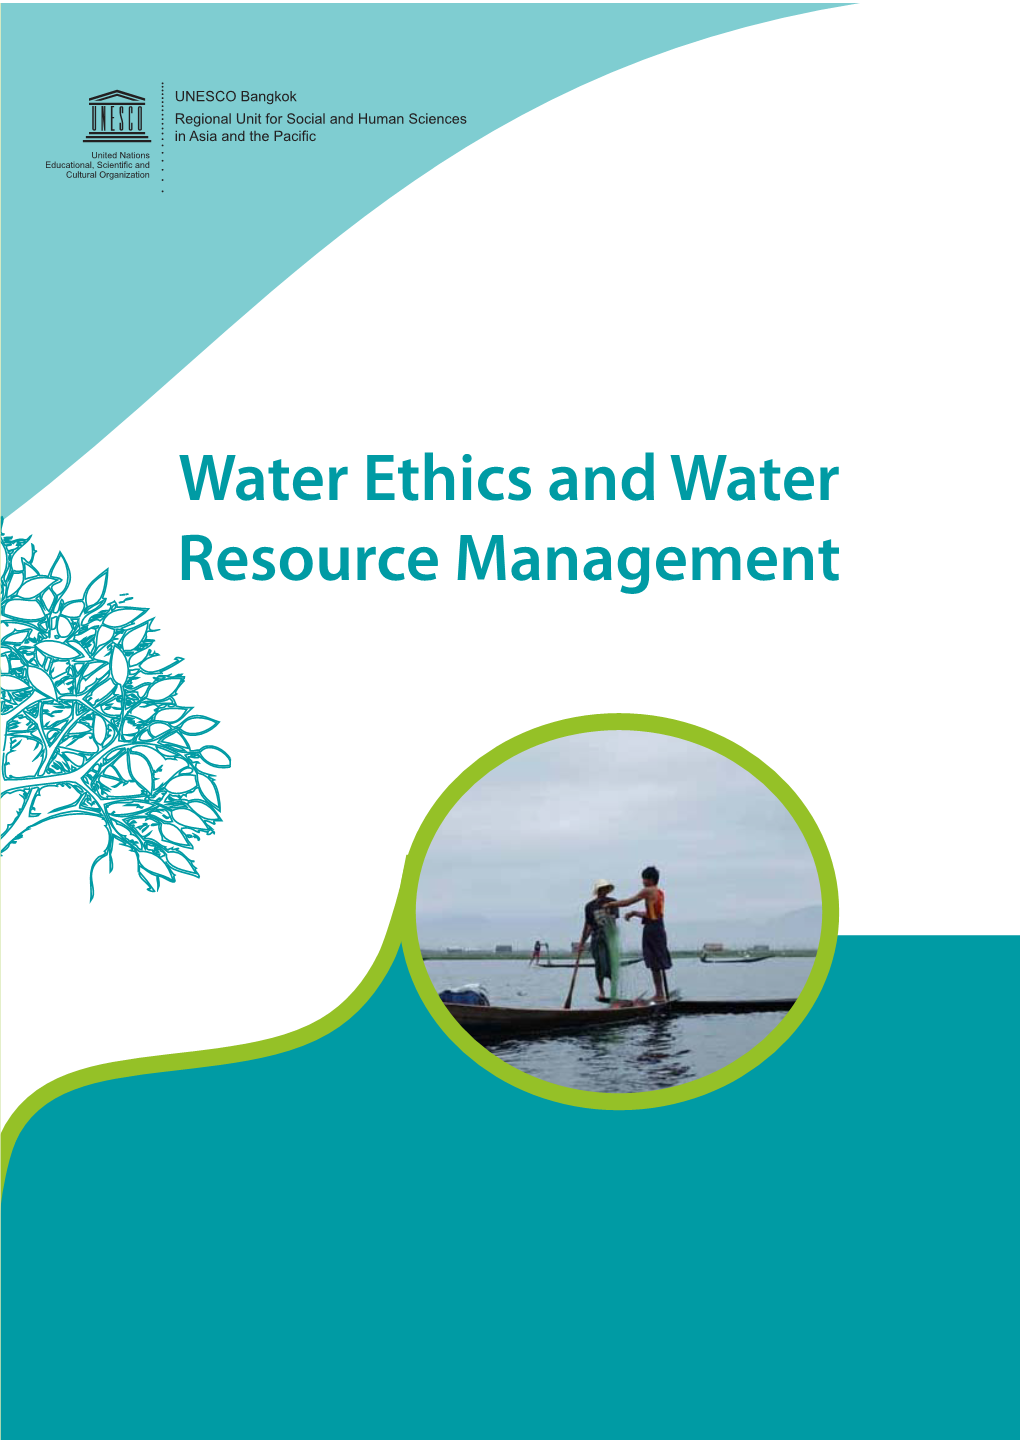 Water Ethics and Water Resource Management Ethics and Climate Change in Asia and the Pacific (ECCAP) Project